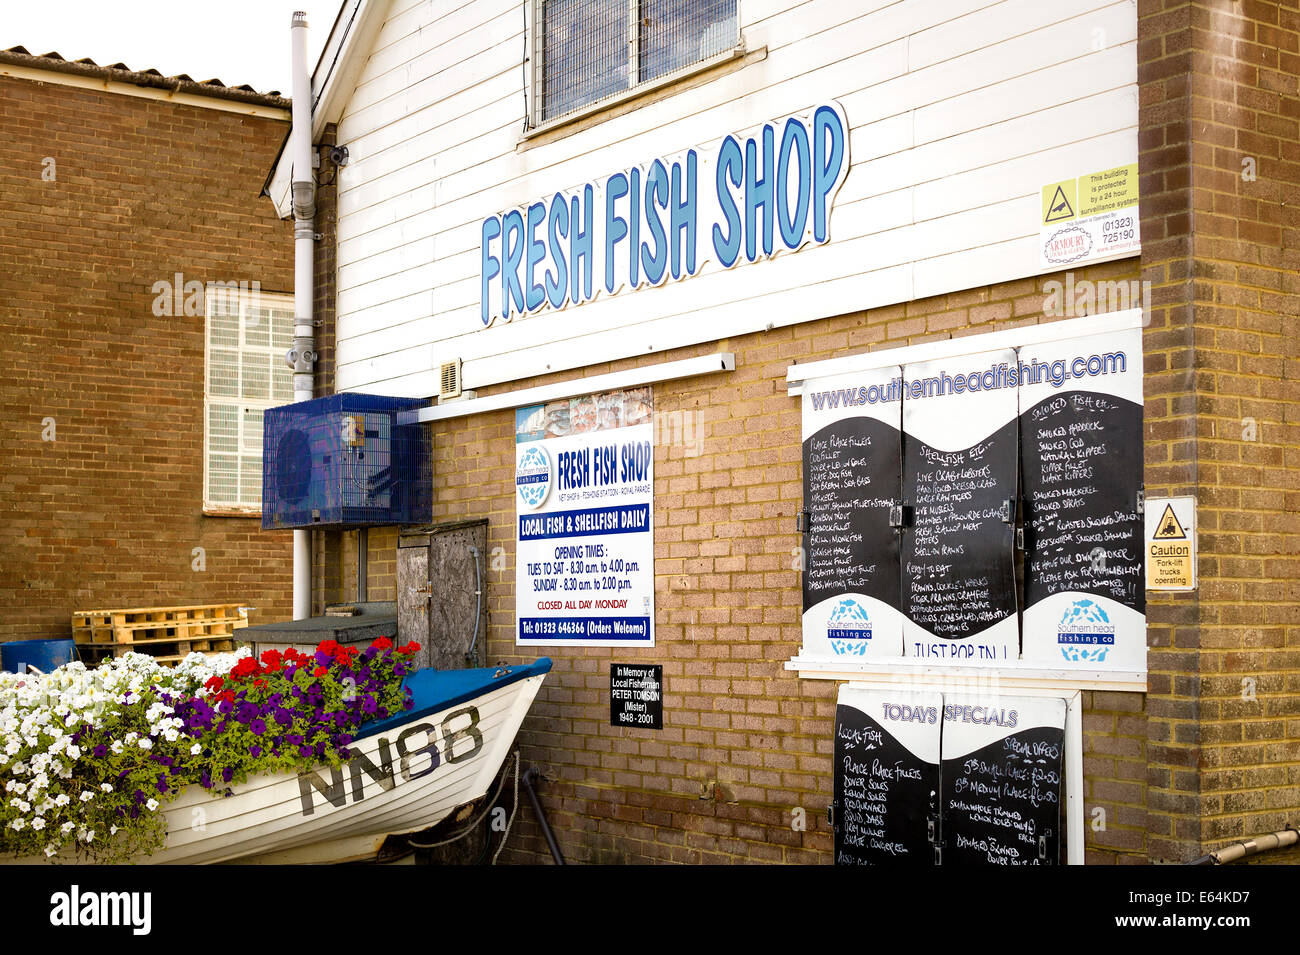 Rear approach to a Fresh fish shop off the beach at Eastbourne Sussex UK Stock Photo